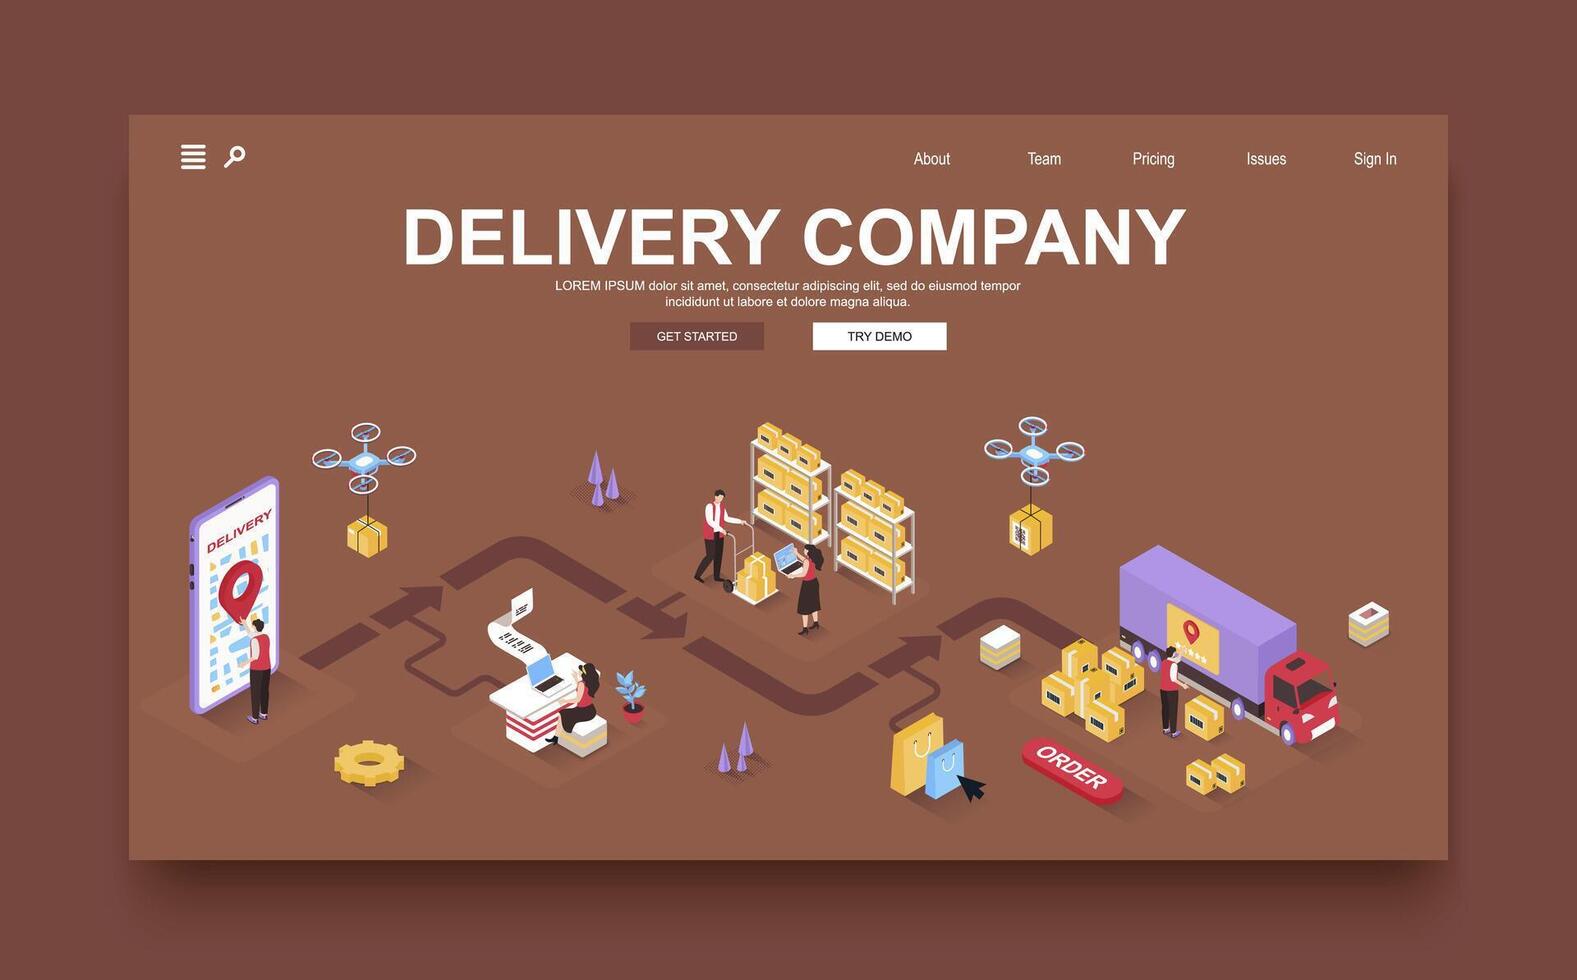 Delivery company concept 3d isometric landing page template. People order goods online and receive parcels, employees work in post warehouses. Vector illustration in isometry graphic design.